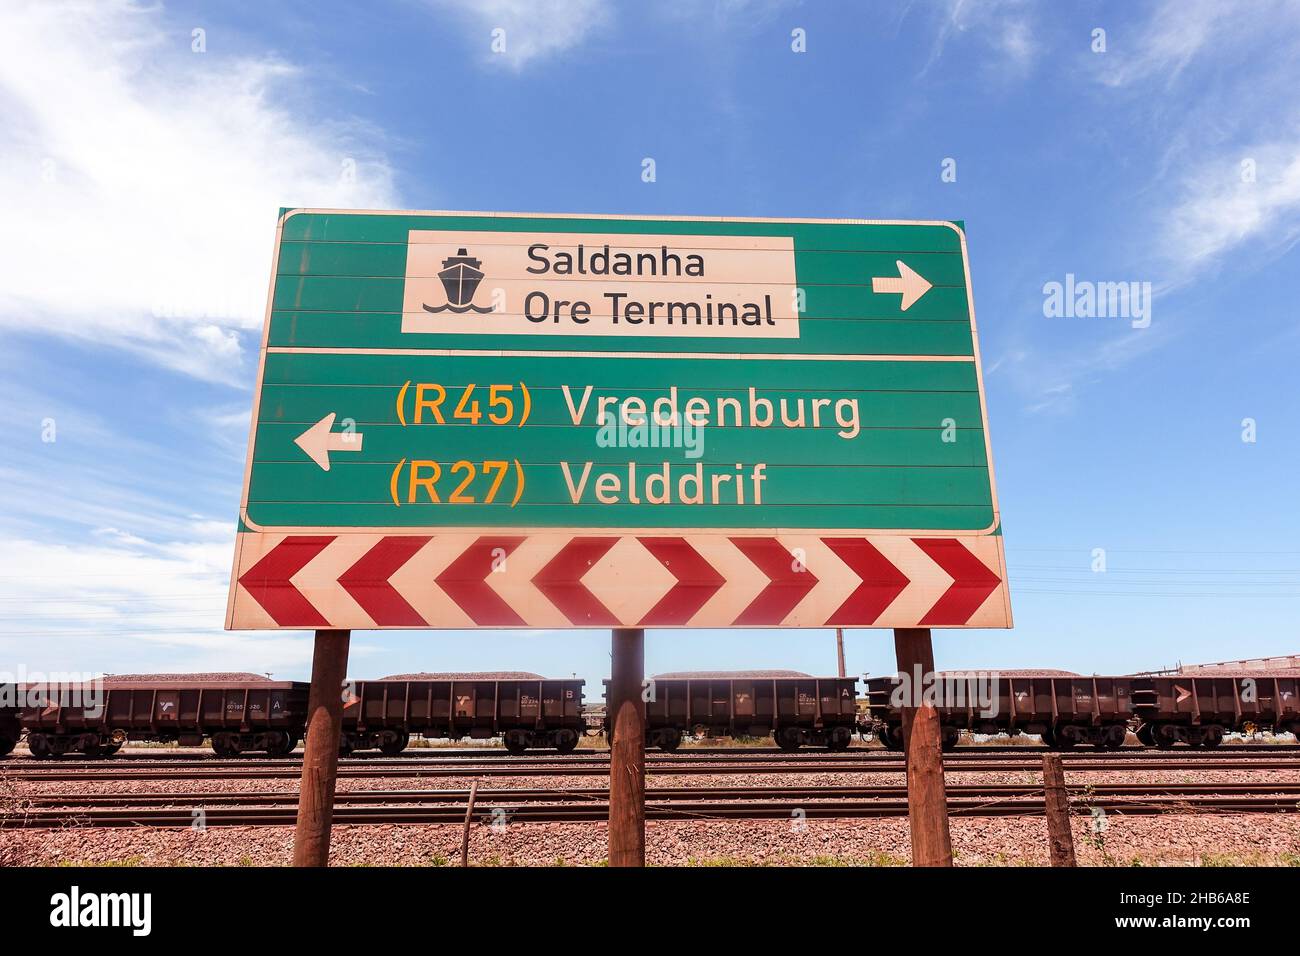 Road sign for the Saldanha ore terminal and train wagons or iron ore Stock Photo